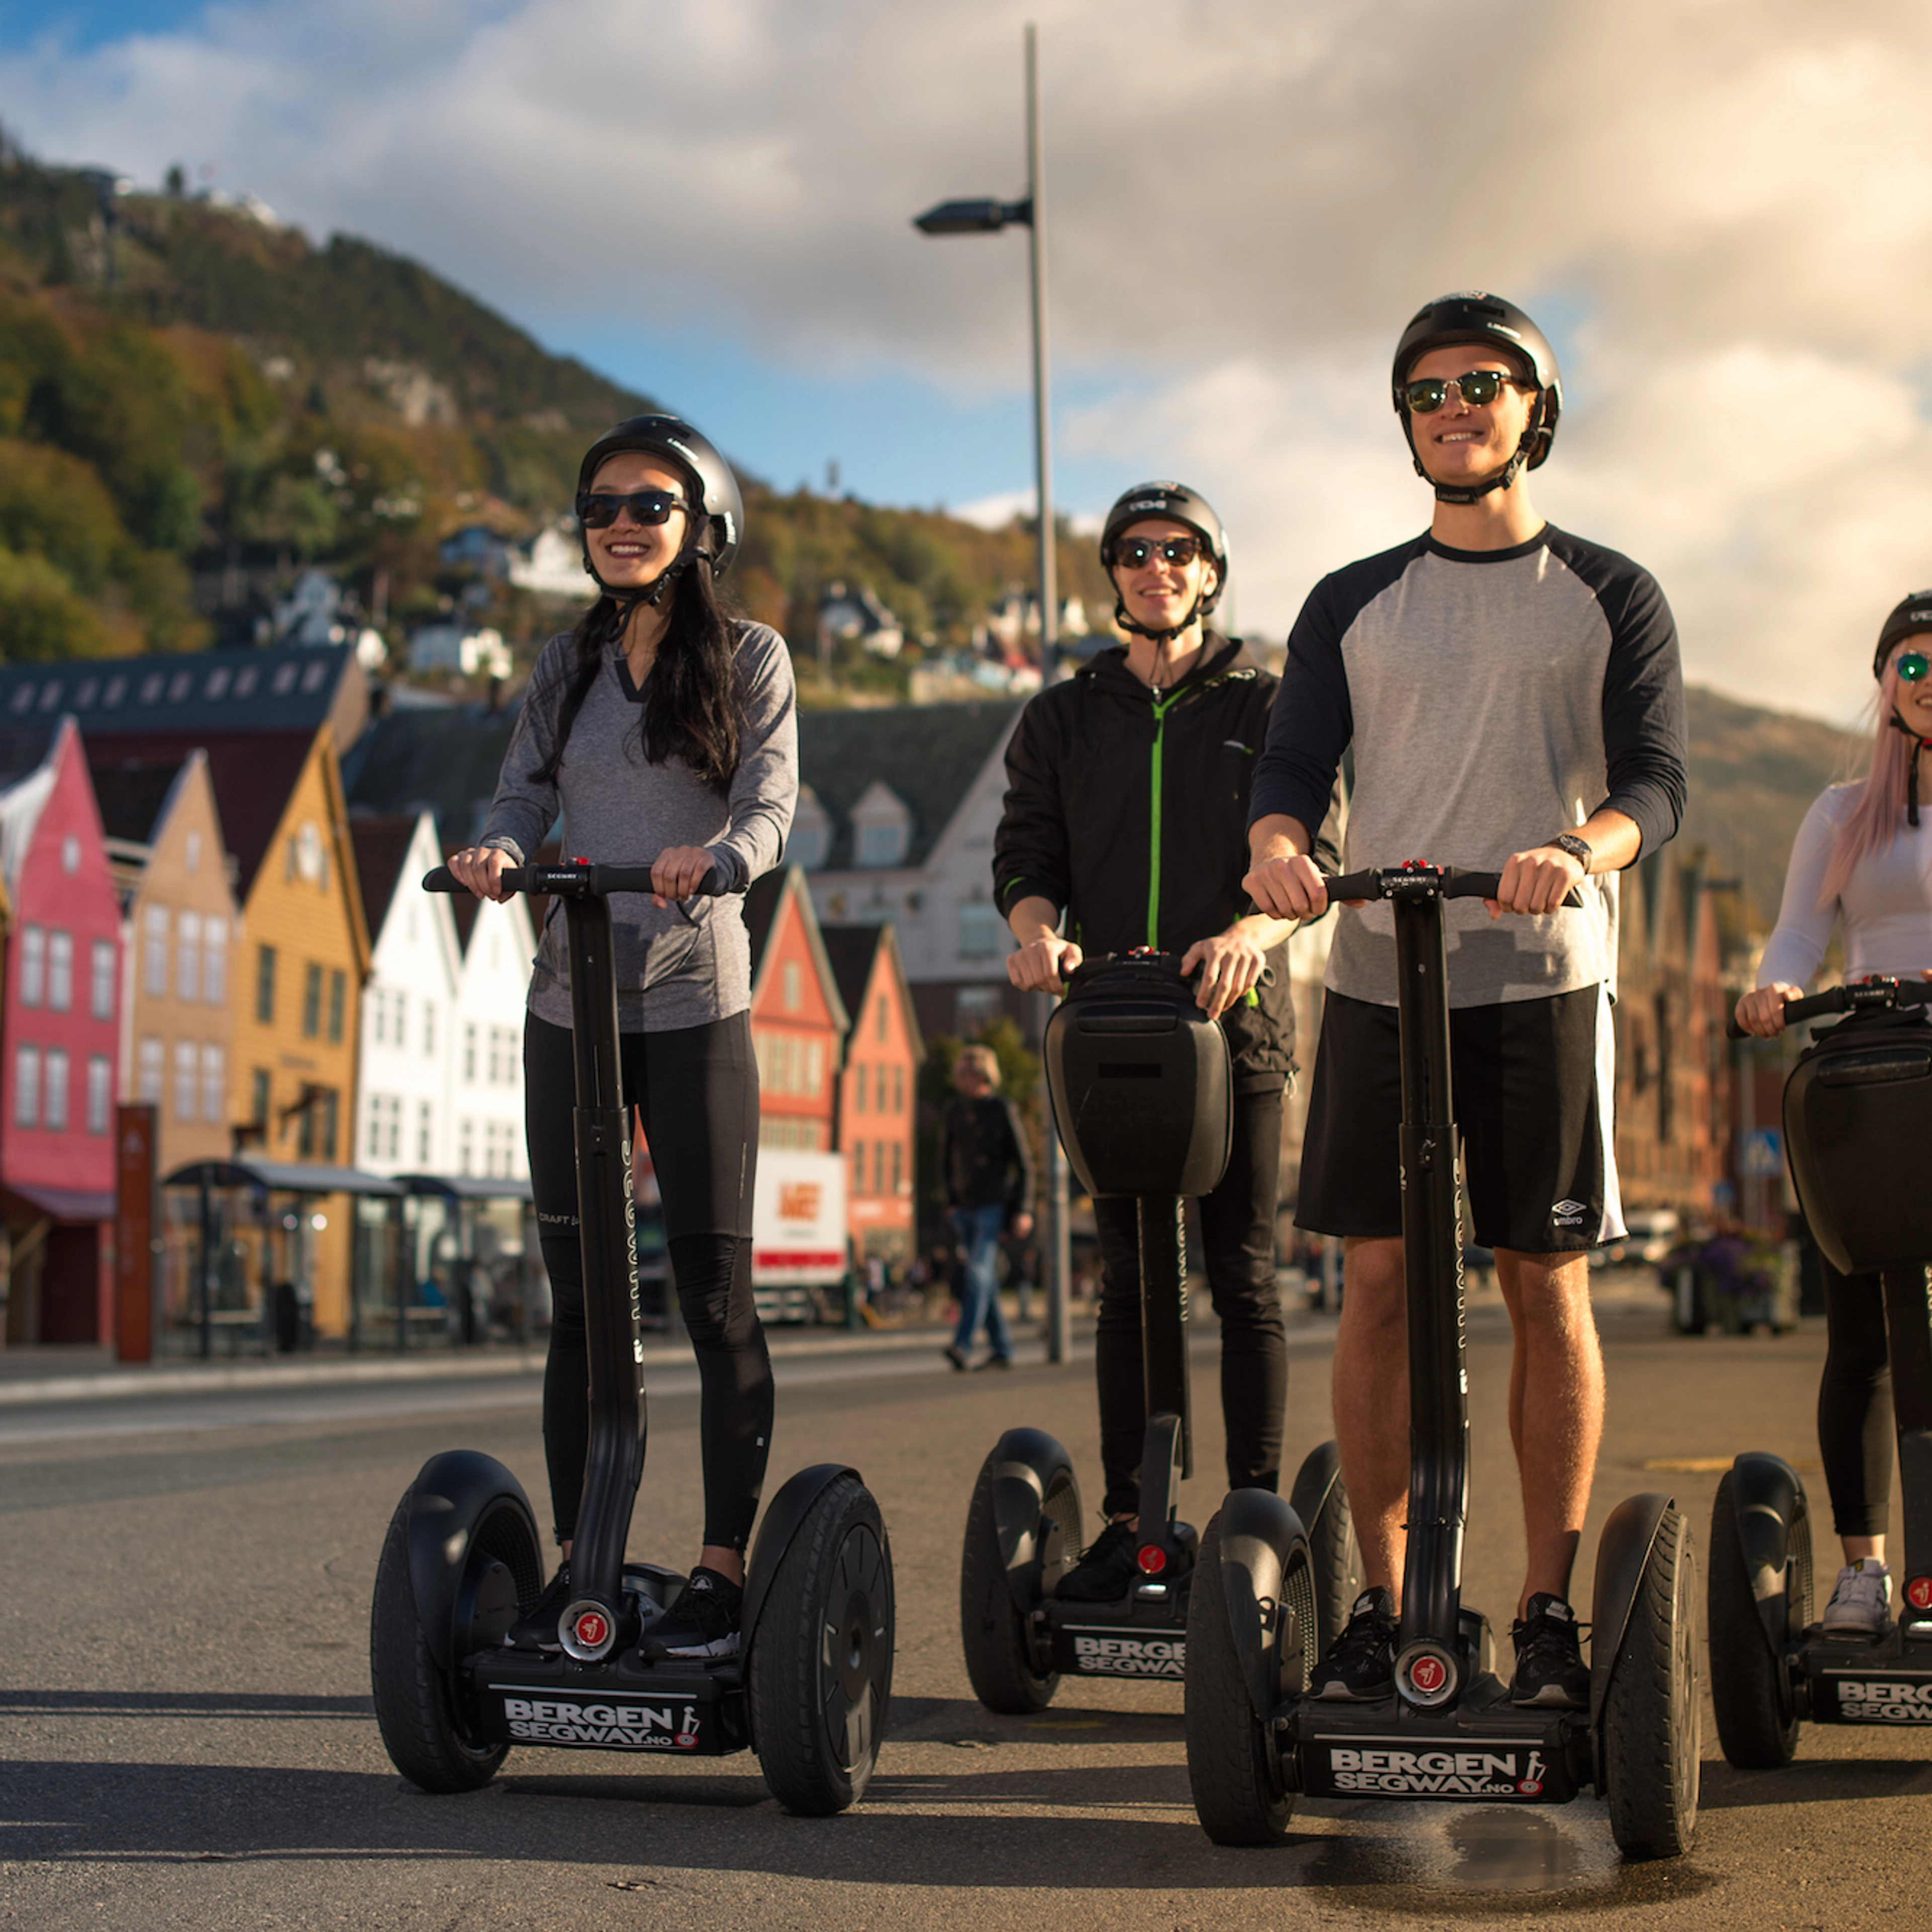 Things to do in Bergen - guided Segway tour in Bergen, Norway